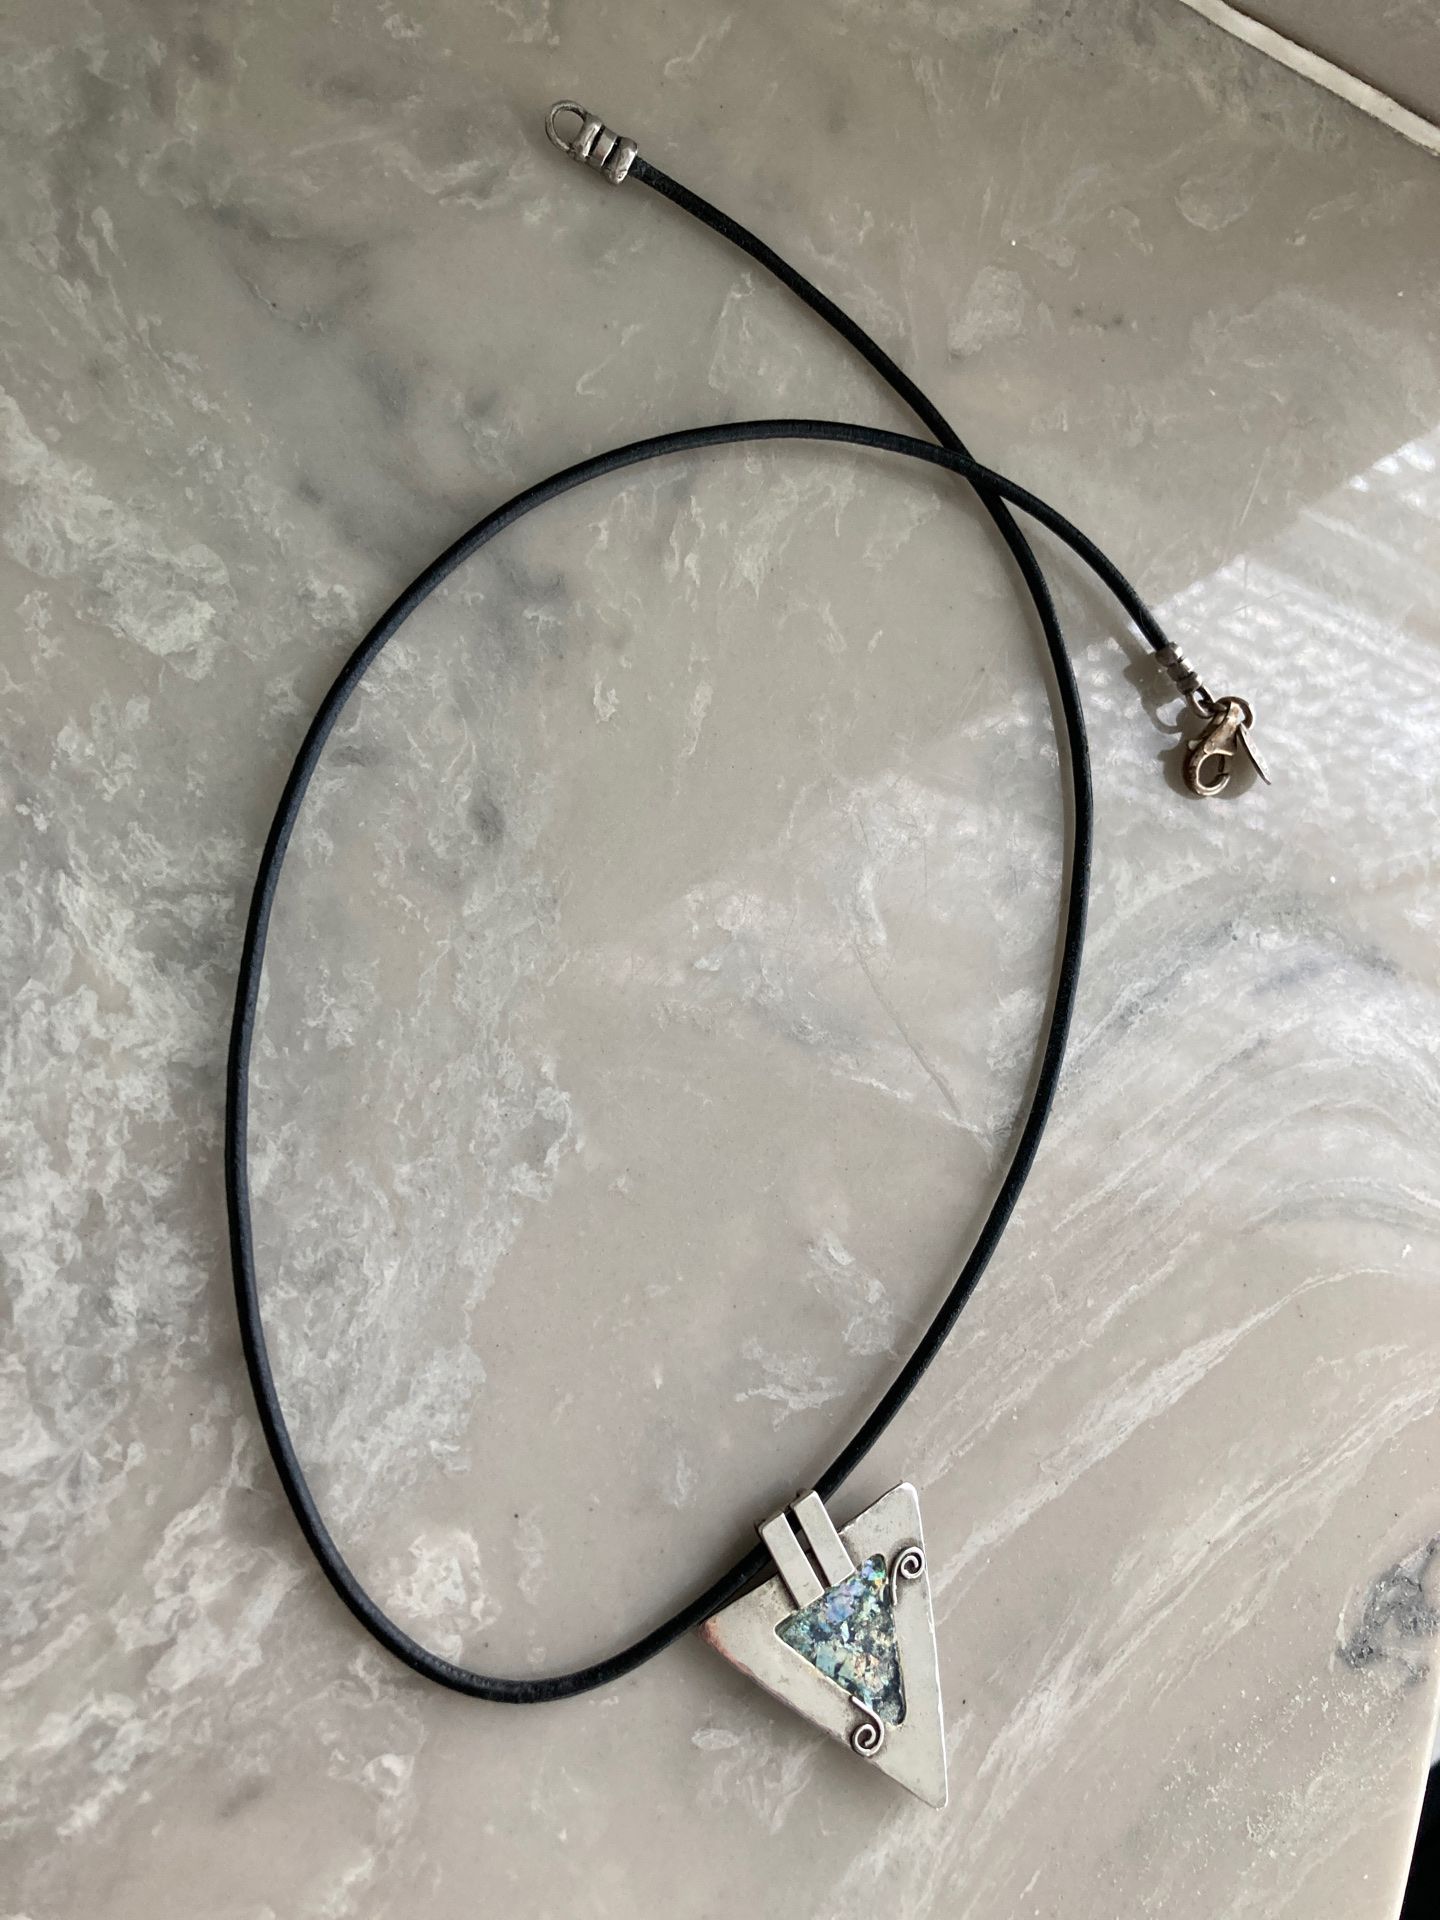 Sterling silver 925 & black leather artist signed necklace. Moonstone opal stone? Native American Indian Navajo? Art Deco? Modern Vintage Beautiful!!